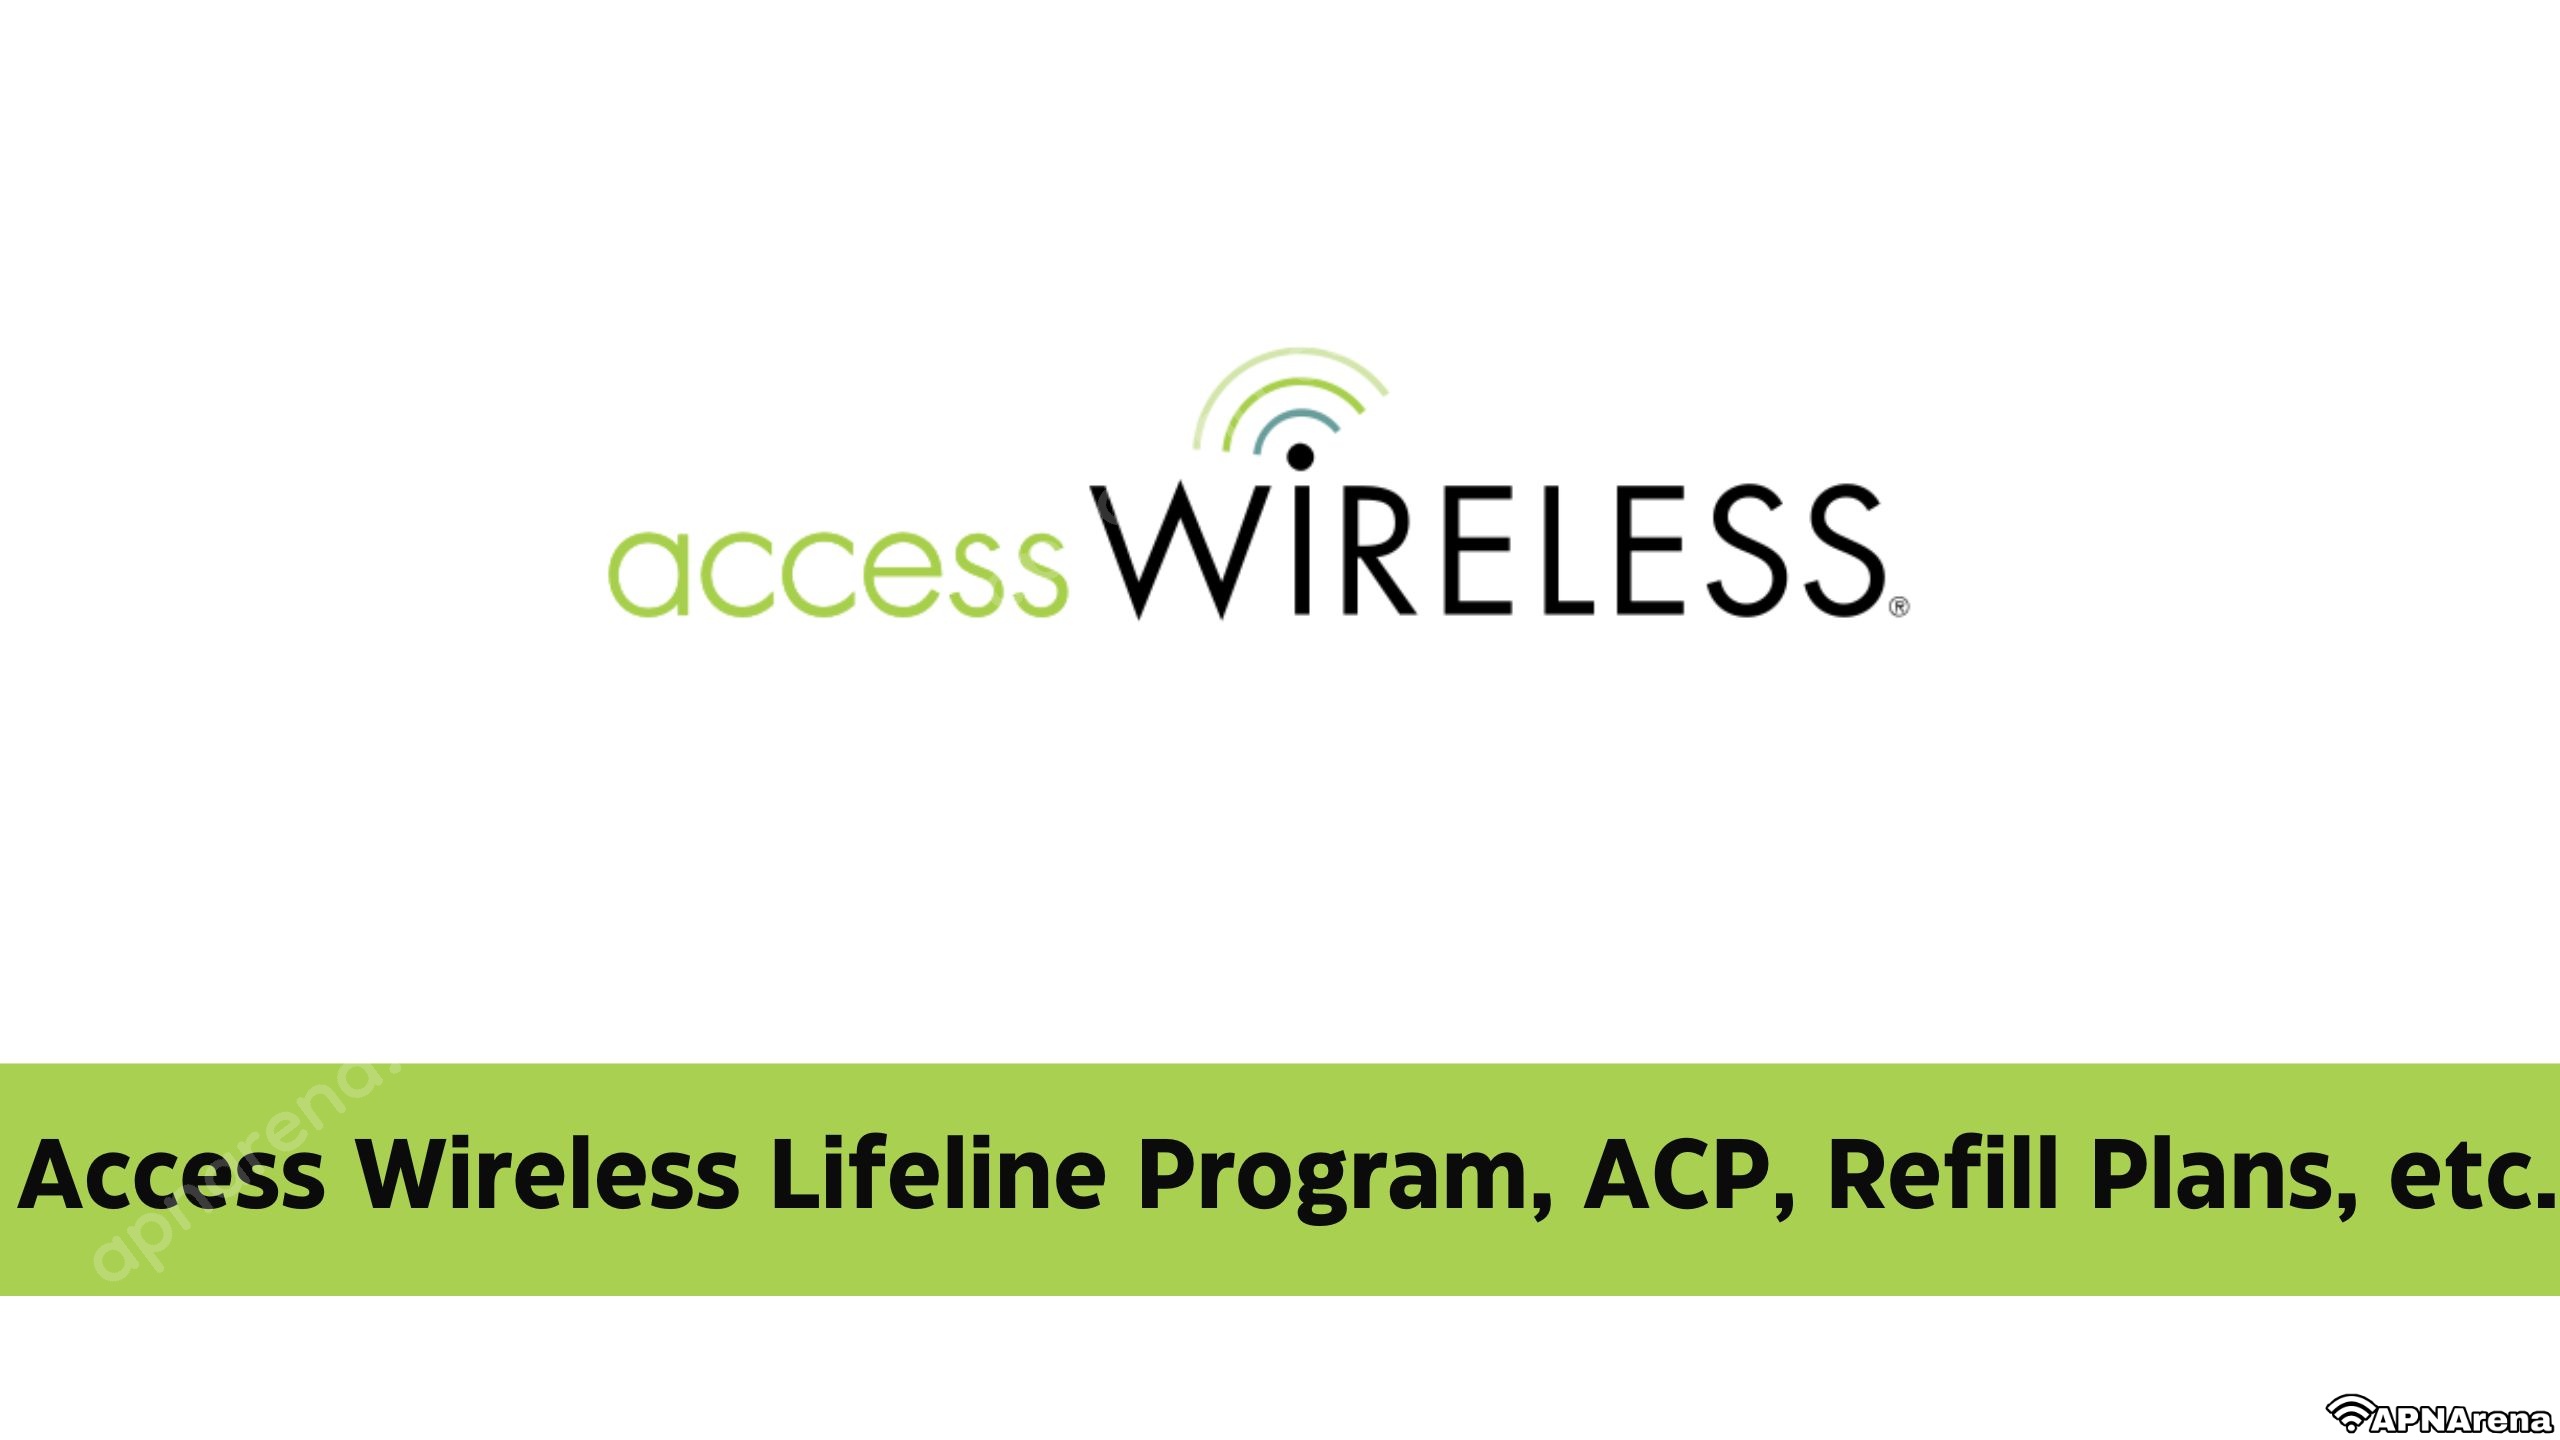 Access Wireless Free Government Phone, Unlimited Data with ACP & Lifeline Program , Application, Status Check